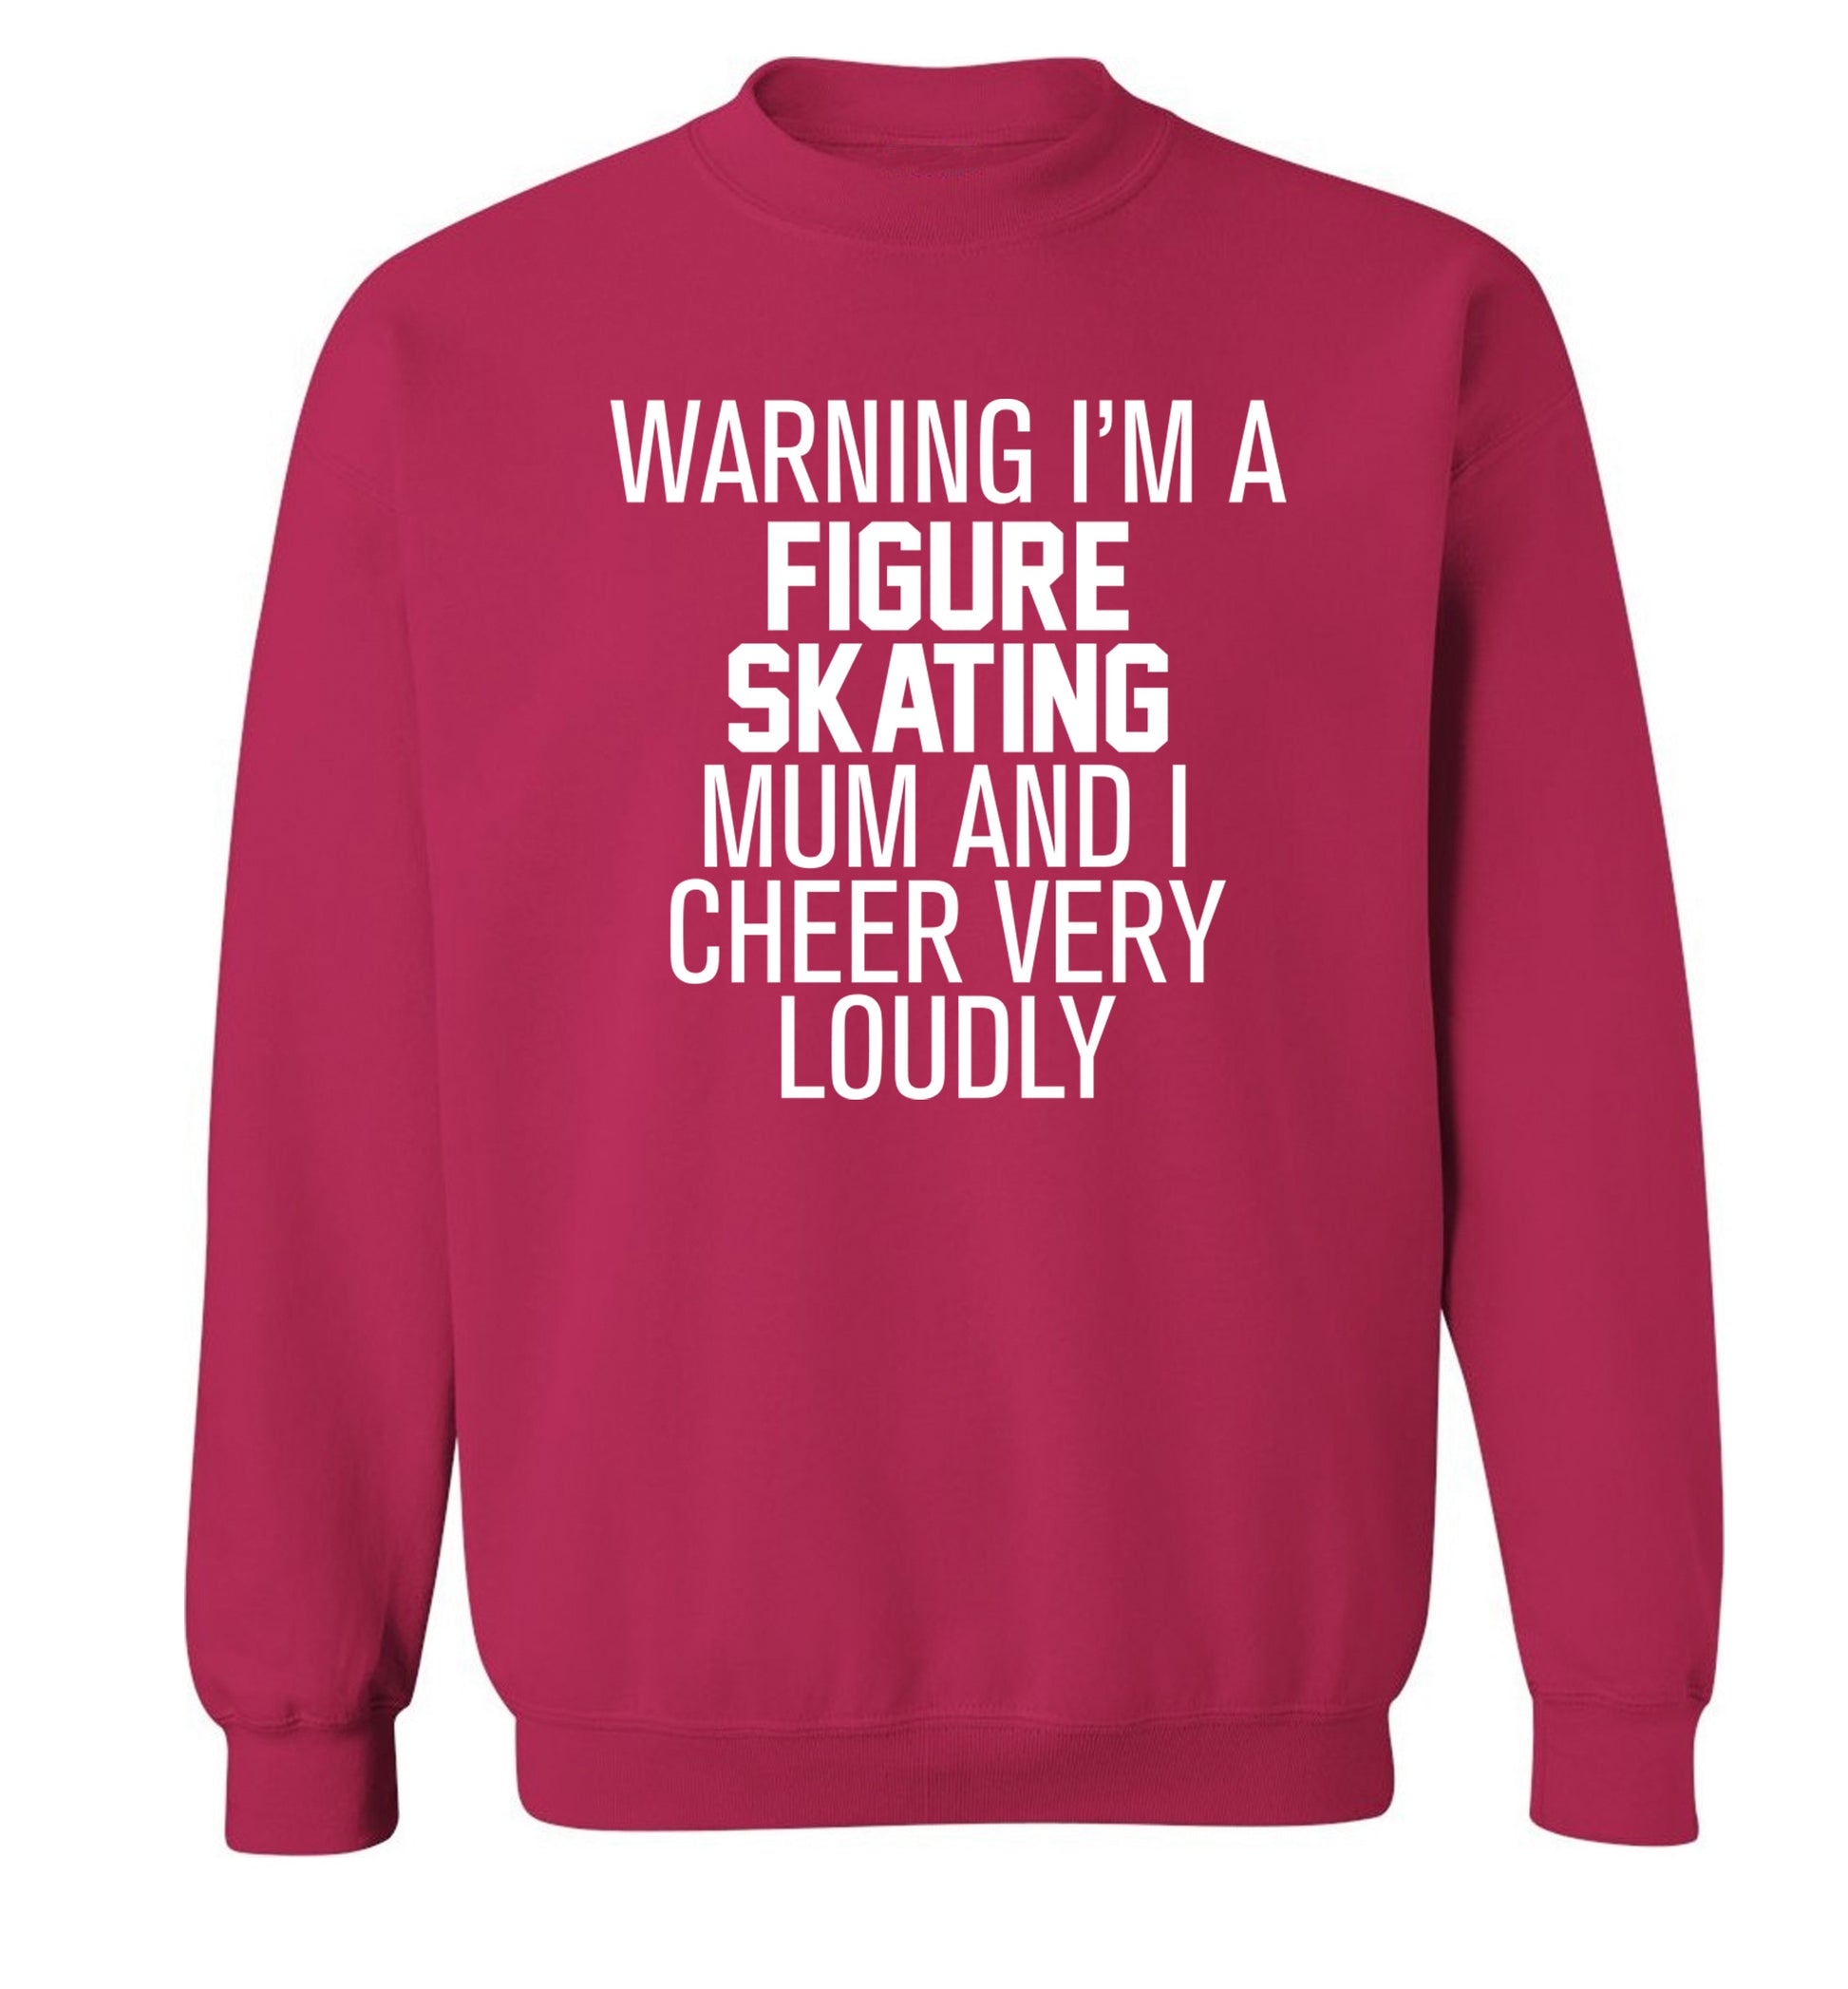 Warning I'm a figure skating mum and I cheer very loudly Adult's unisexpink Sweater 2XL